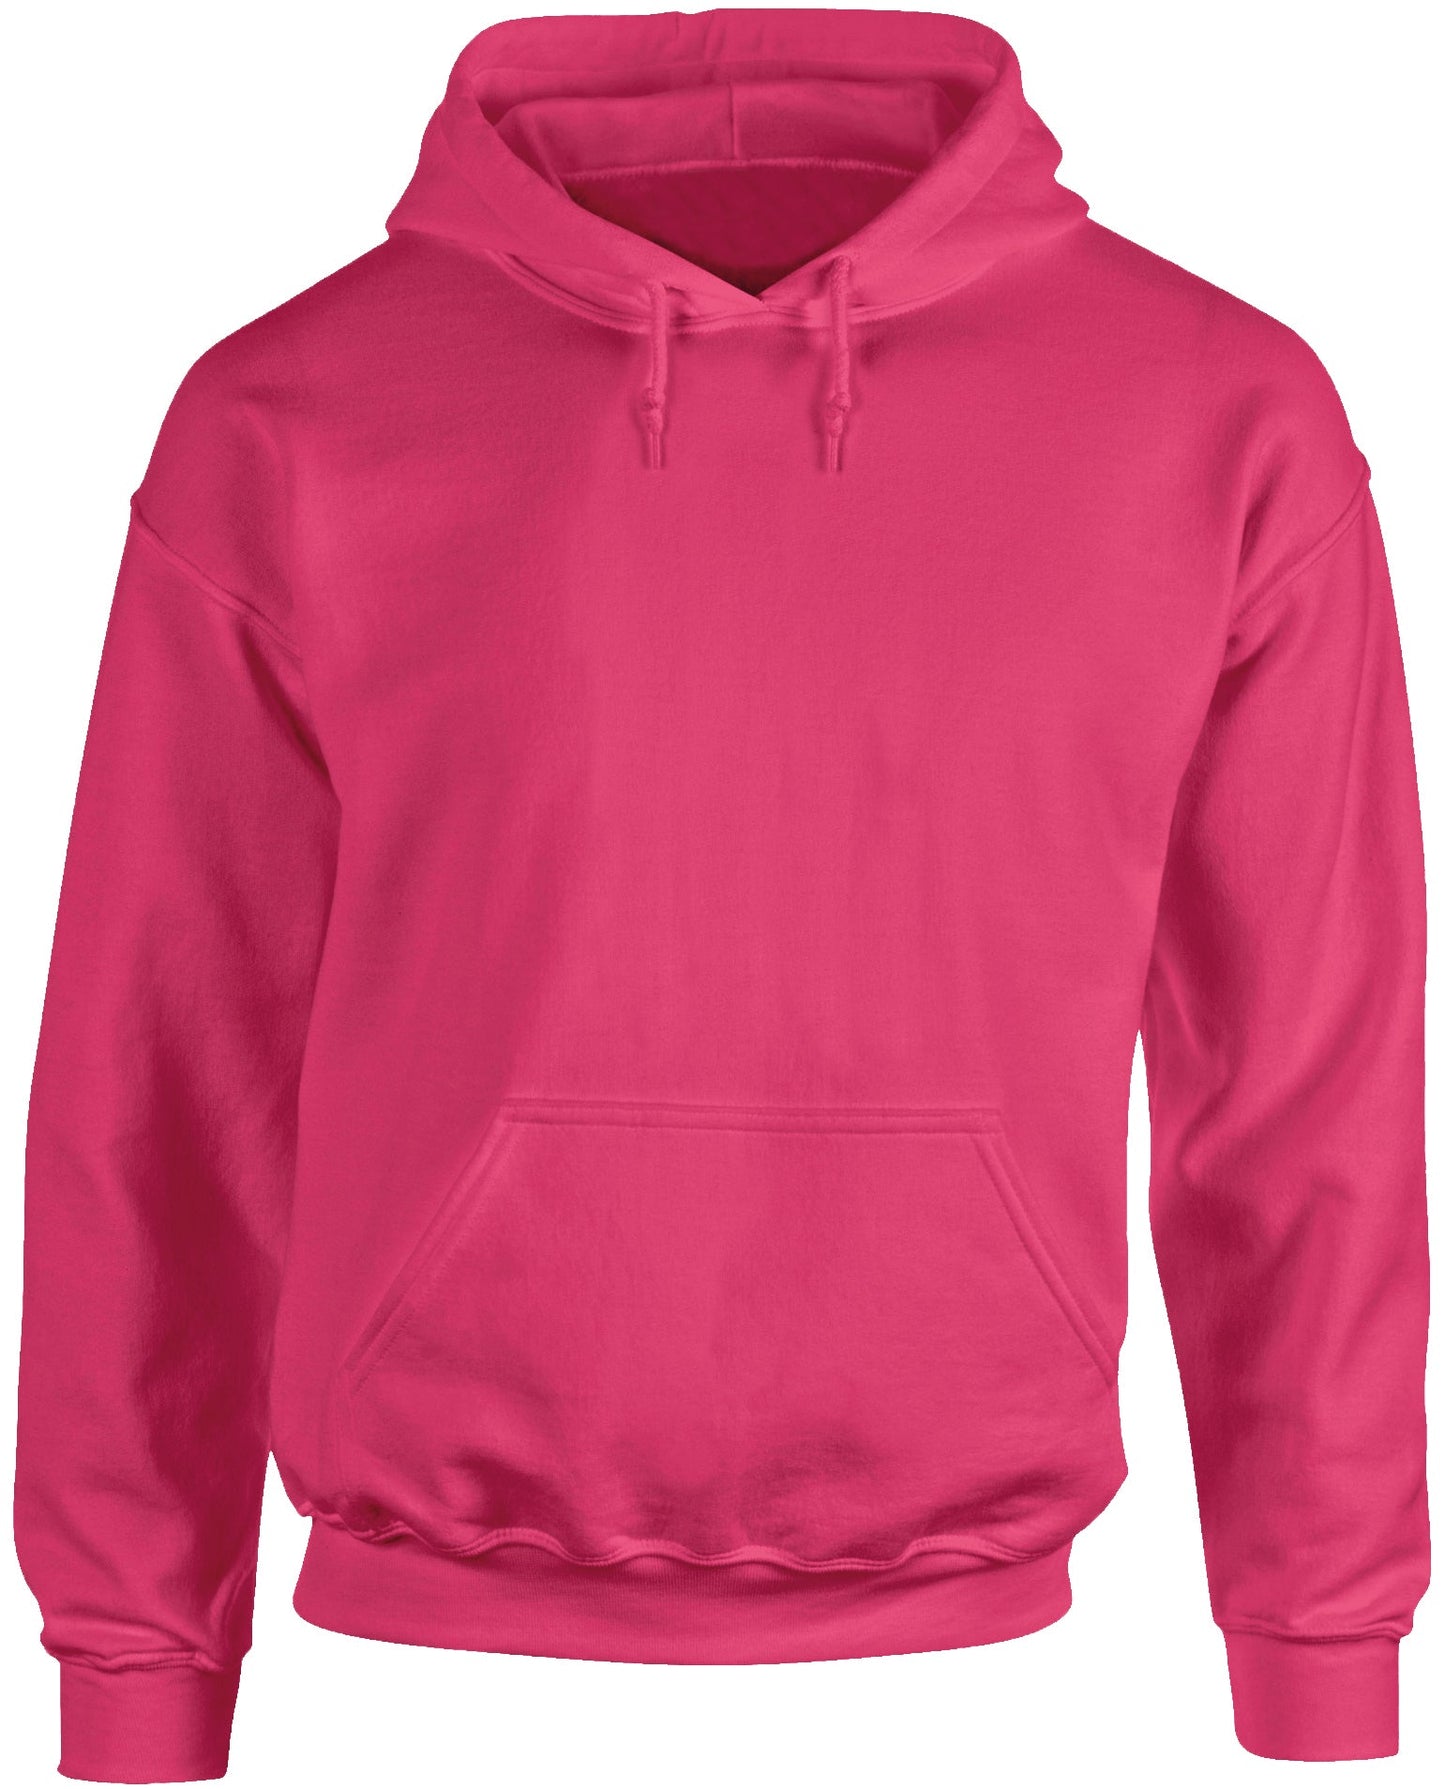 Adults Workwear Hoodie Just Text, 5 or more receive £3 per item discount!